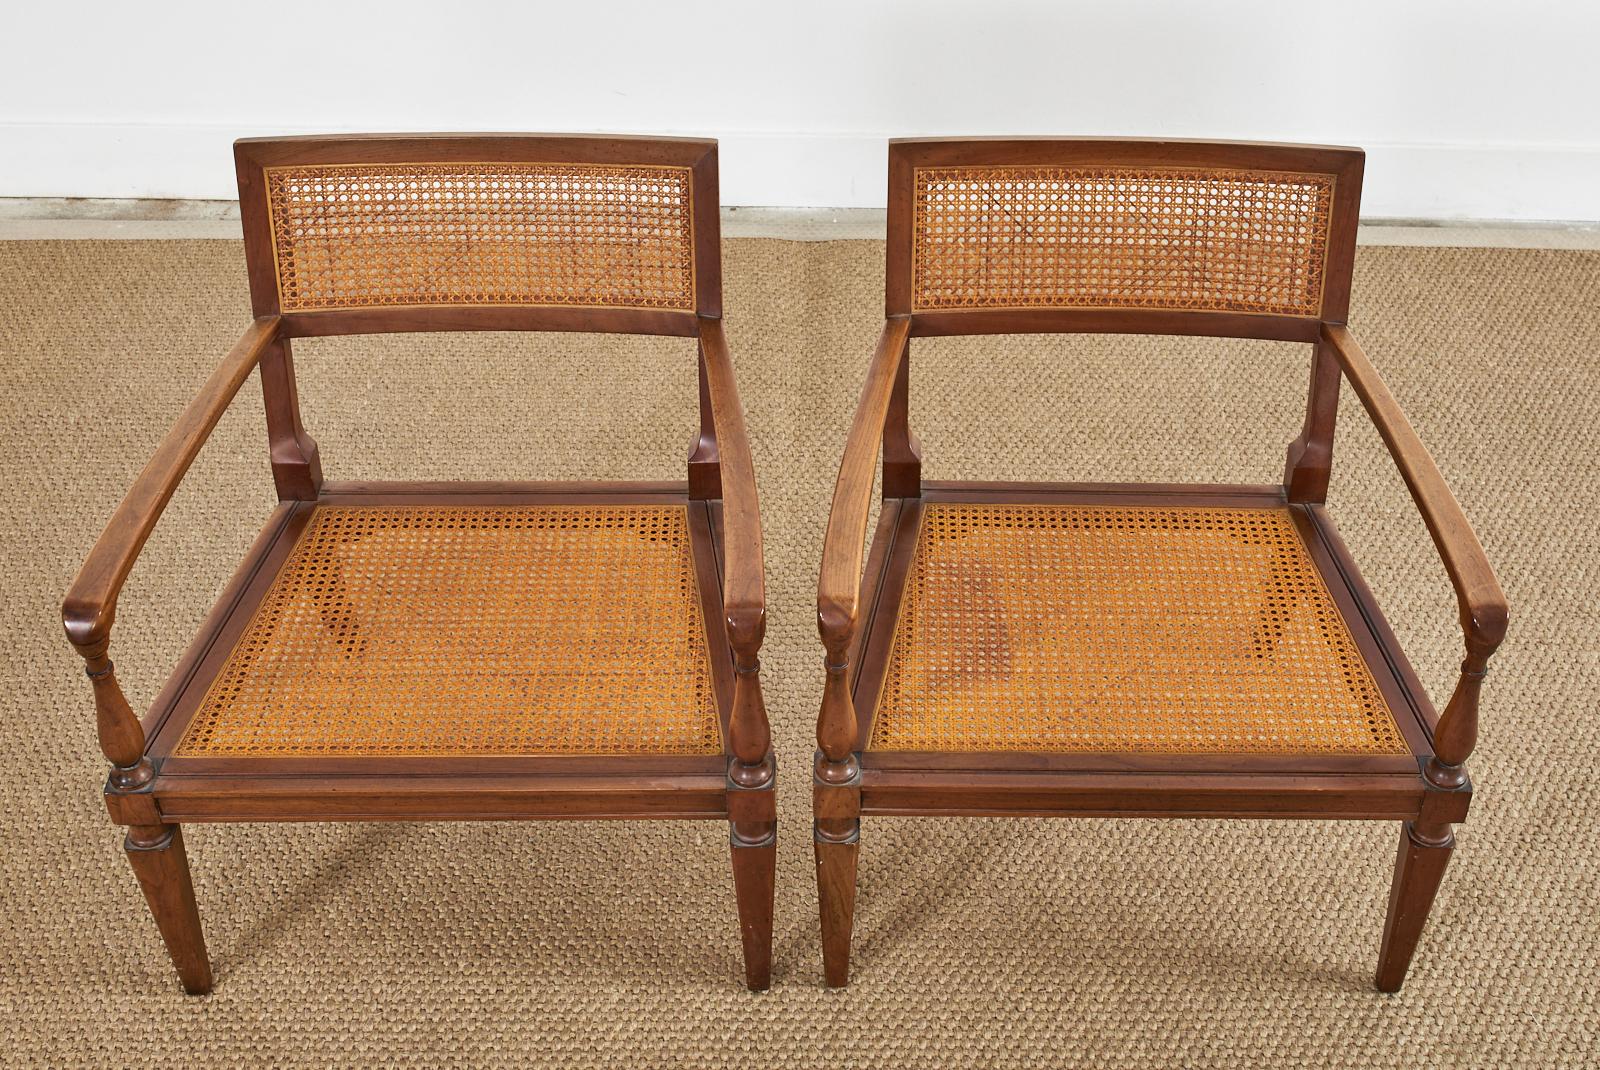 20th Century Pair of Neoclassical Style Walnut Cane Lounge Chairs by Baker